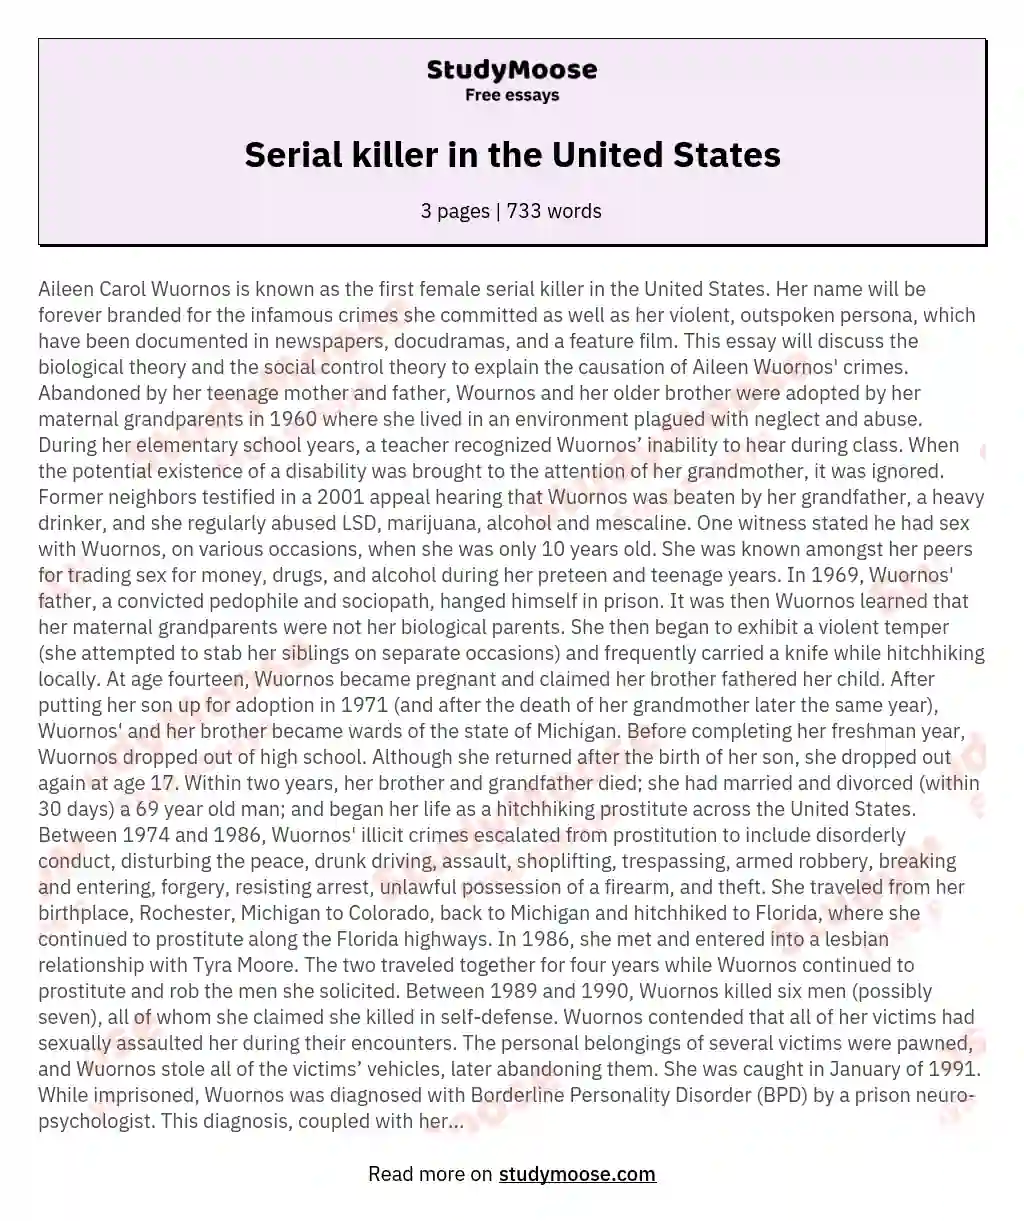 Serial killer in the United States